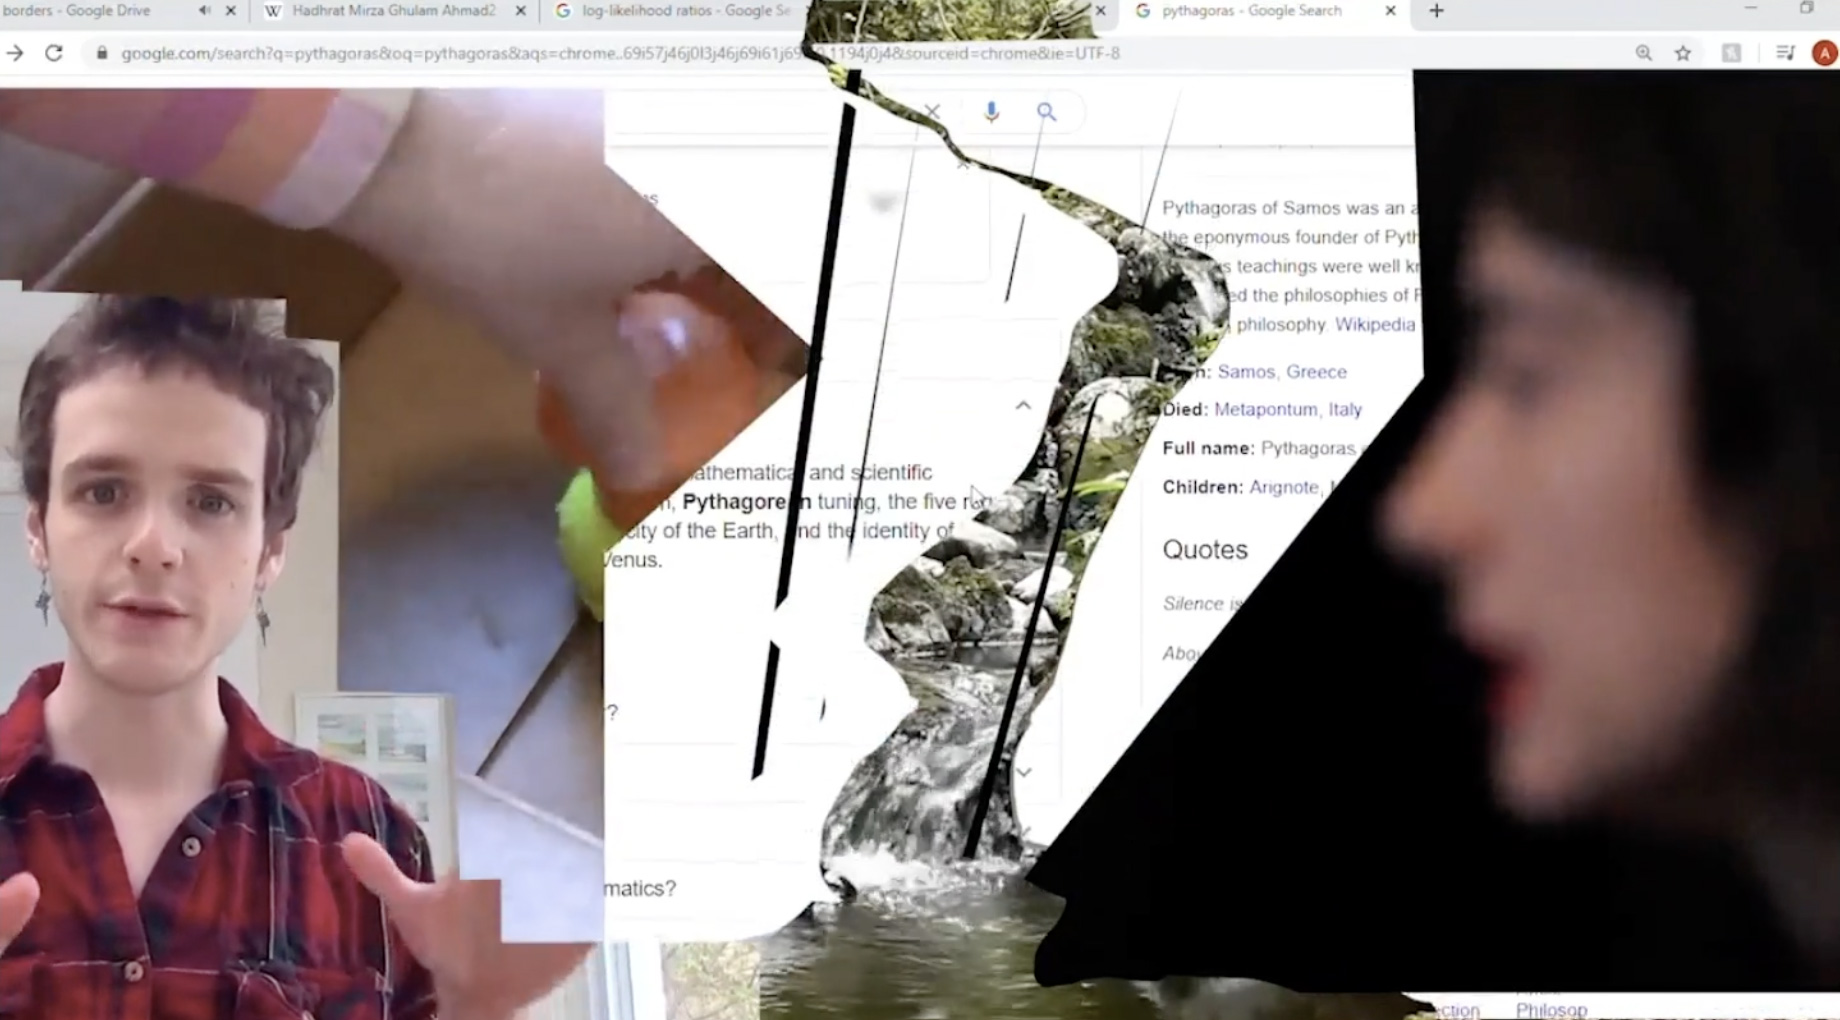 Multiple screenshots are collaged together, including a google search of the Greek philosopher Pythagoras cut to reveal a waterfall behind. A blurry photo of a person’s profile is shown on the right of the image while another person is seen talking on the left corner.